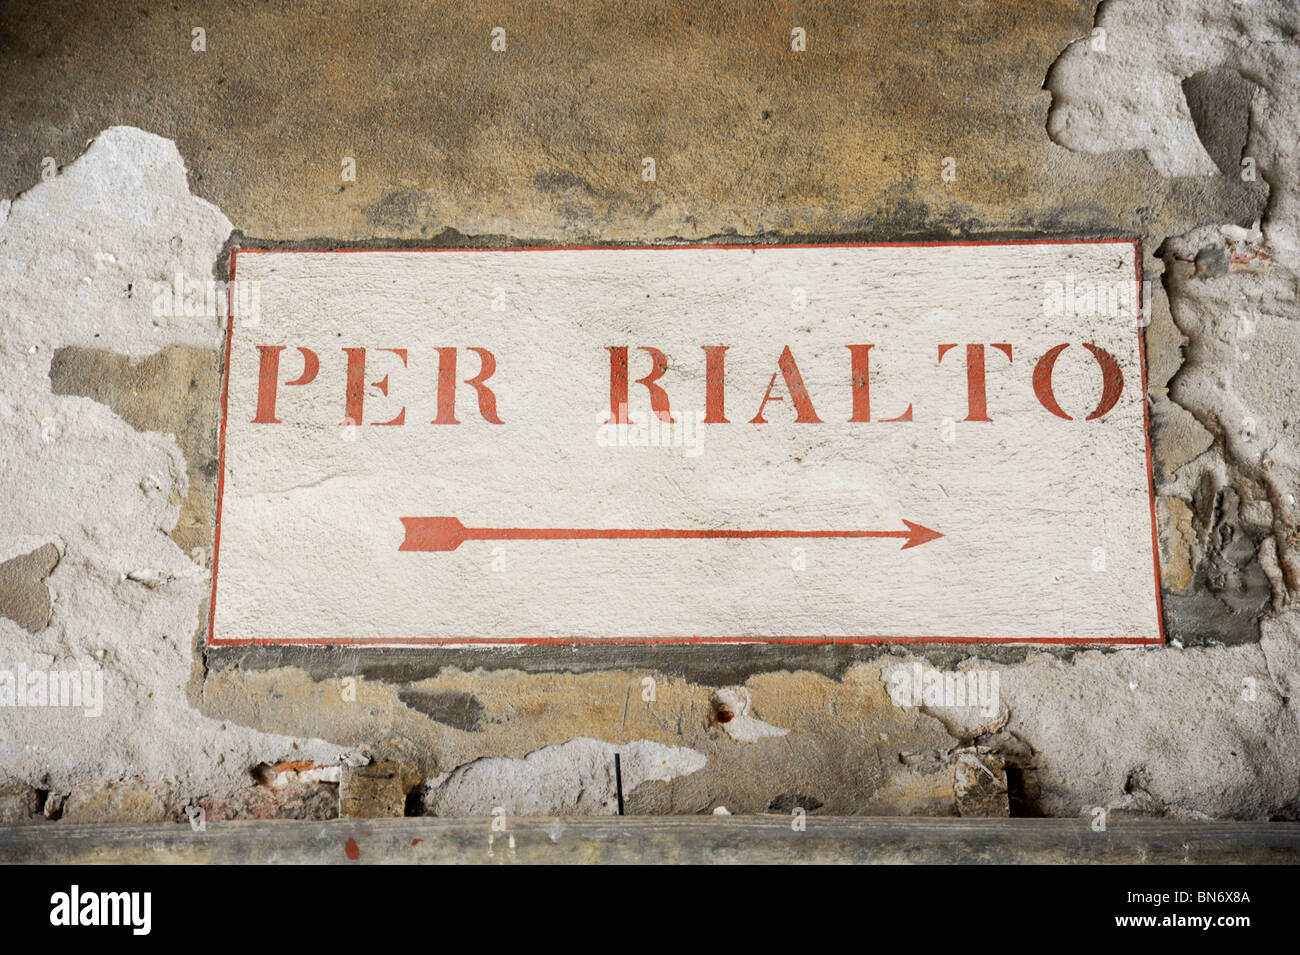 Per Rialto street sign on wall. Close up of old wall and sign. Stock Photo